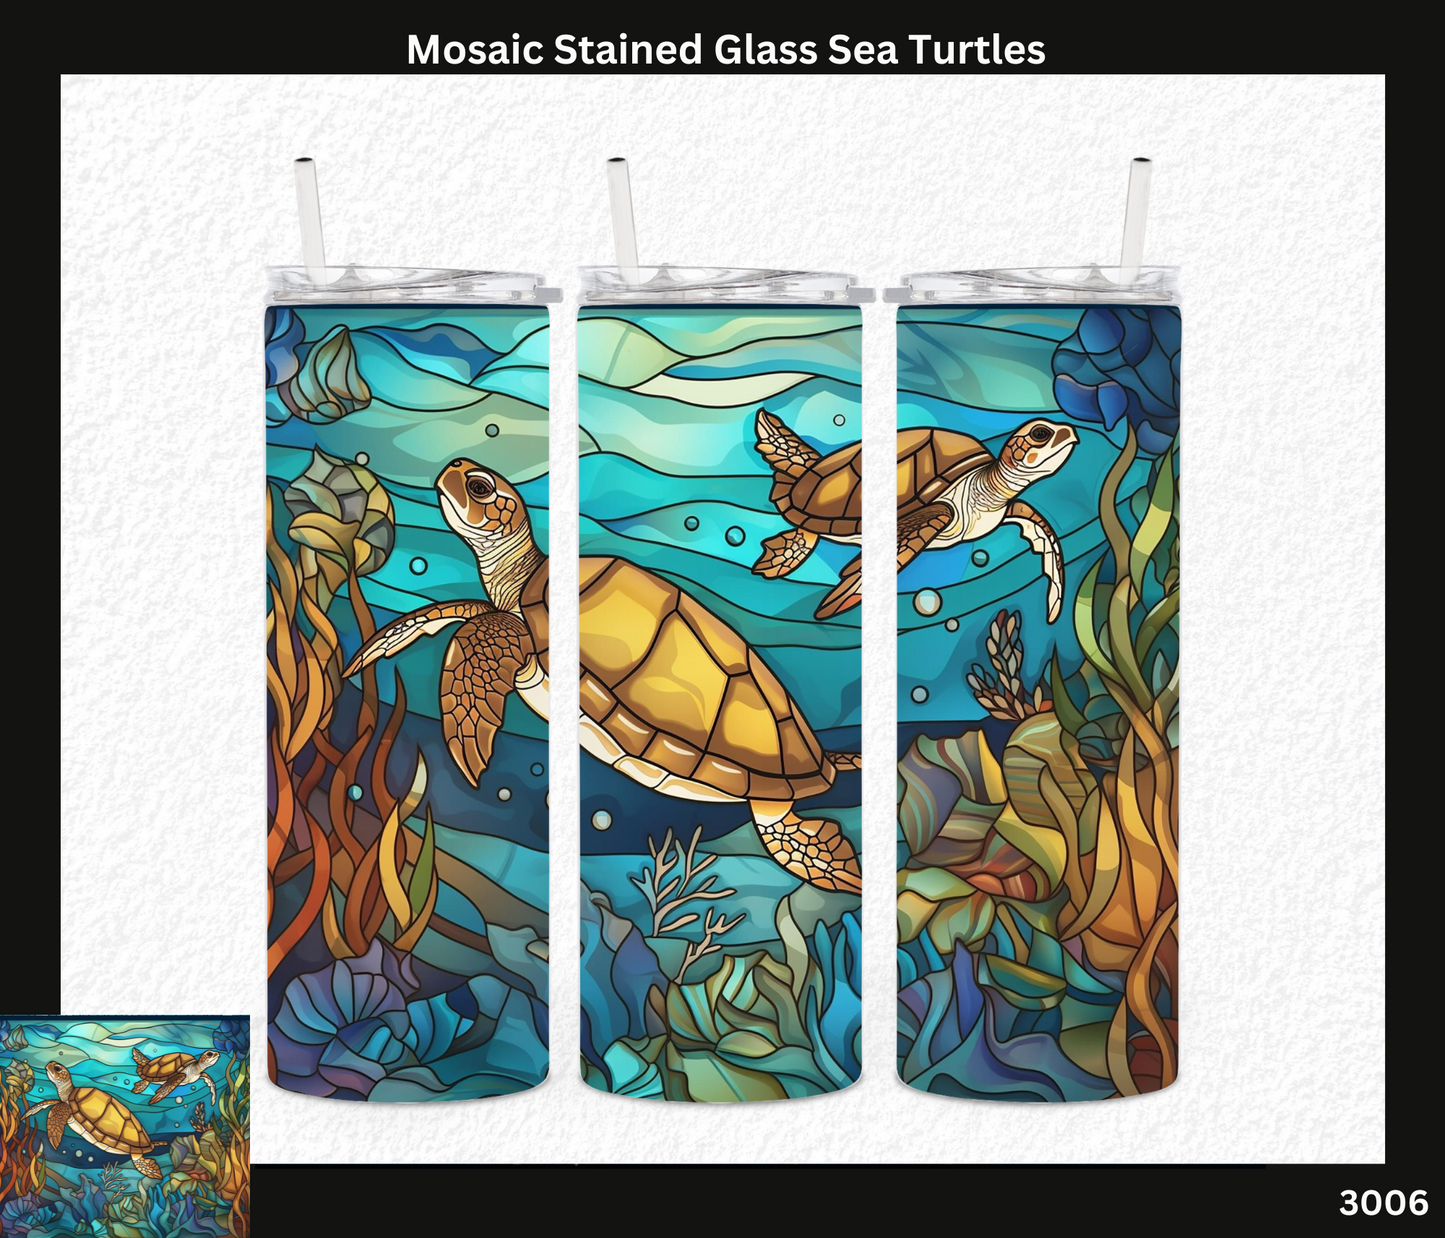 Mosaic Stained Glass Sea Turtles